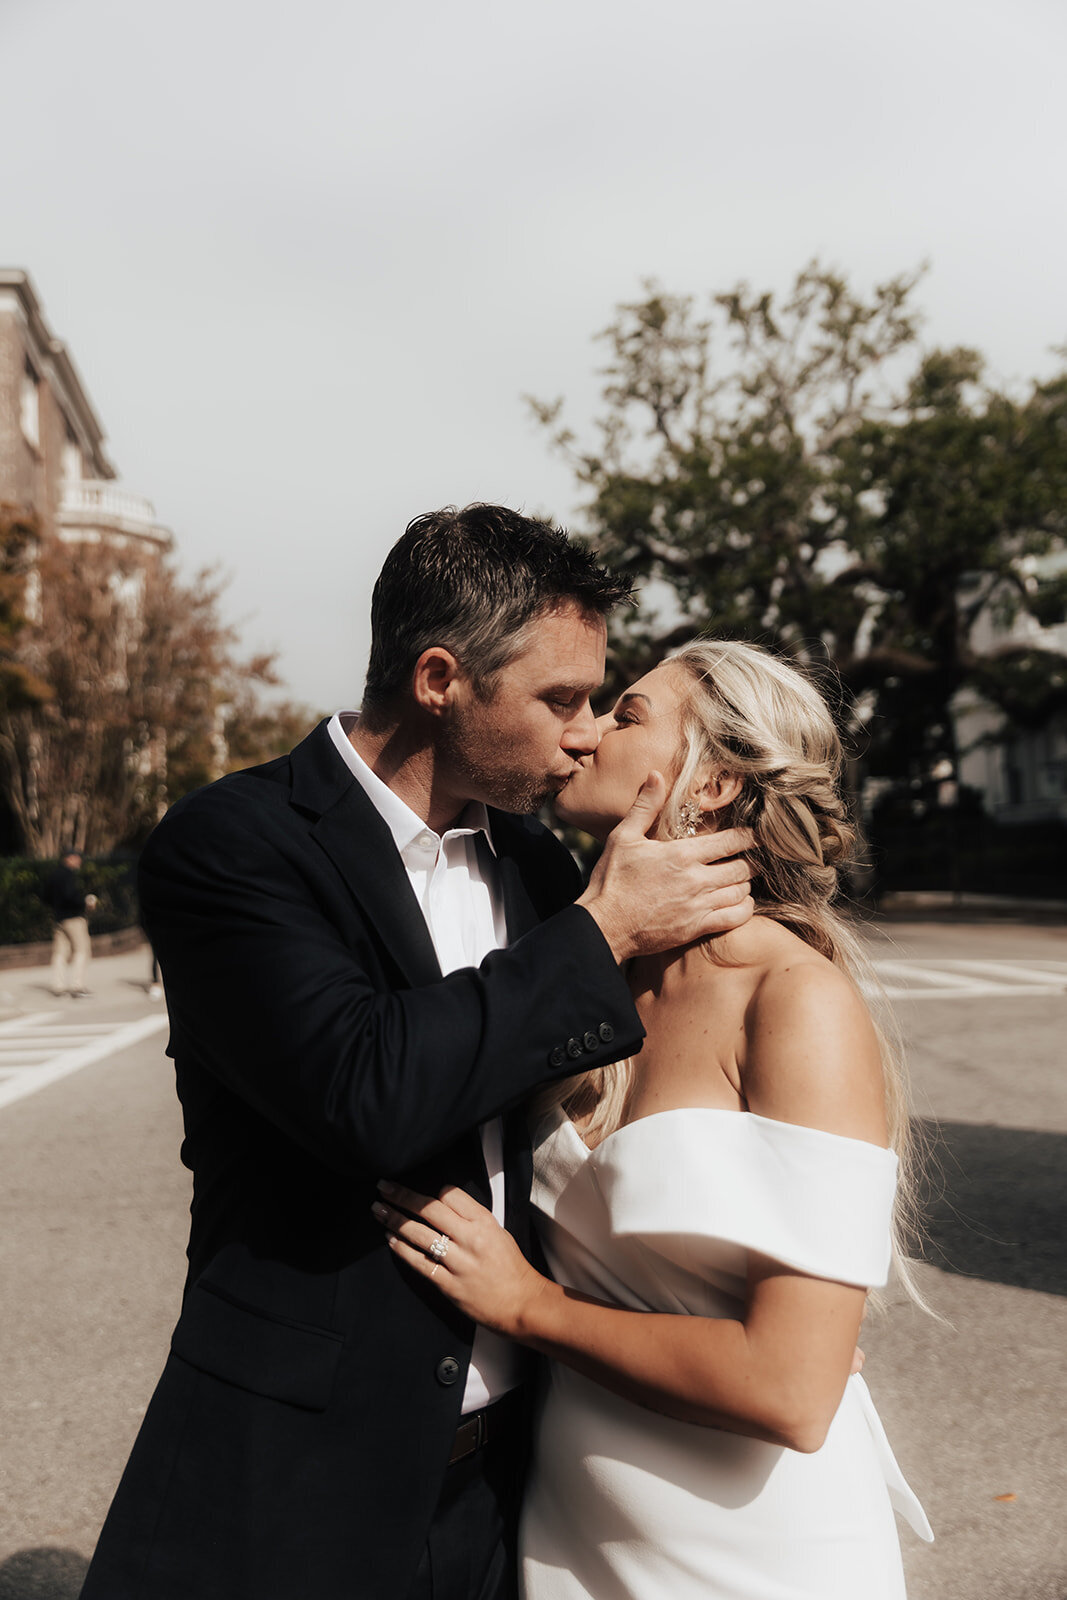 Couple sharing a kiss after eloping in Charleston